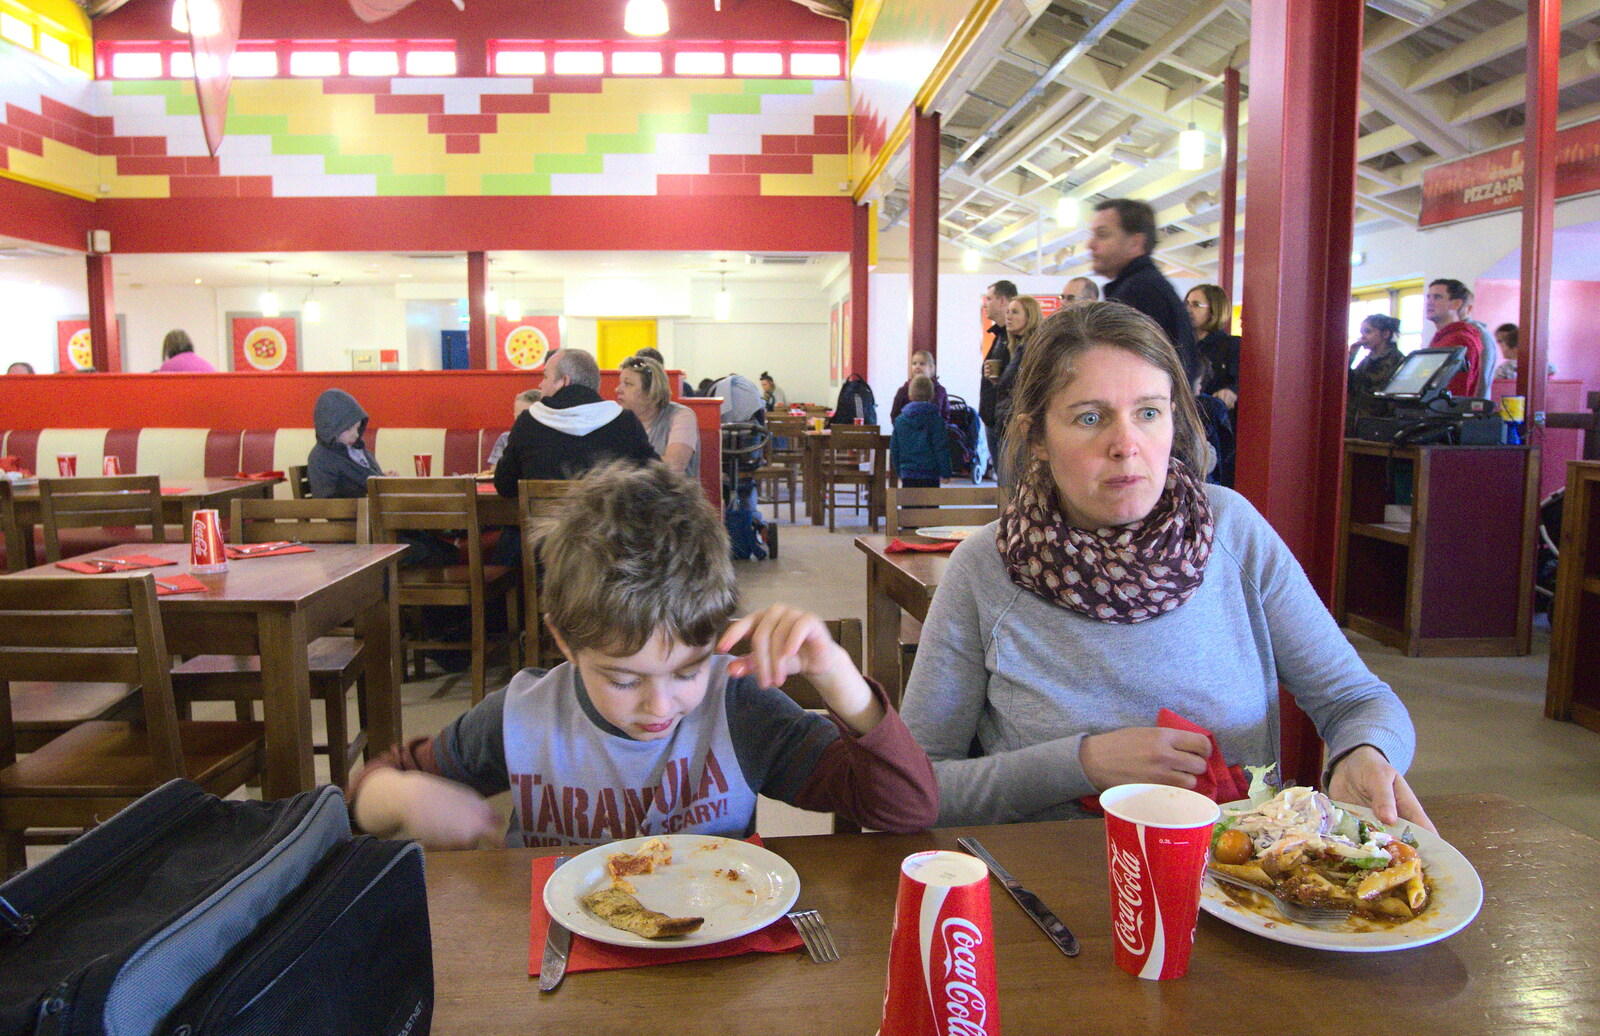 Fred and Isobel in the canteen from A Trip to Legoland, Windsor, Berkshire - 25th March 2017